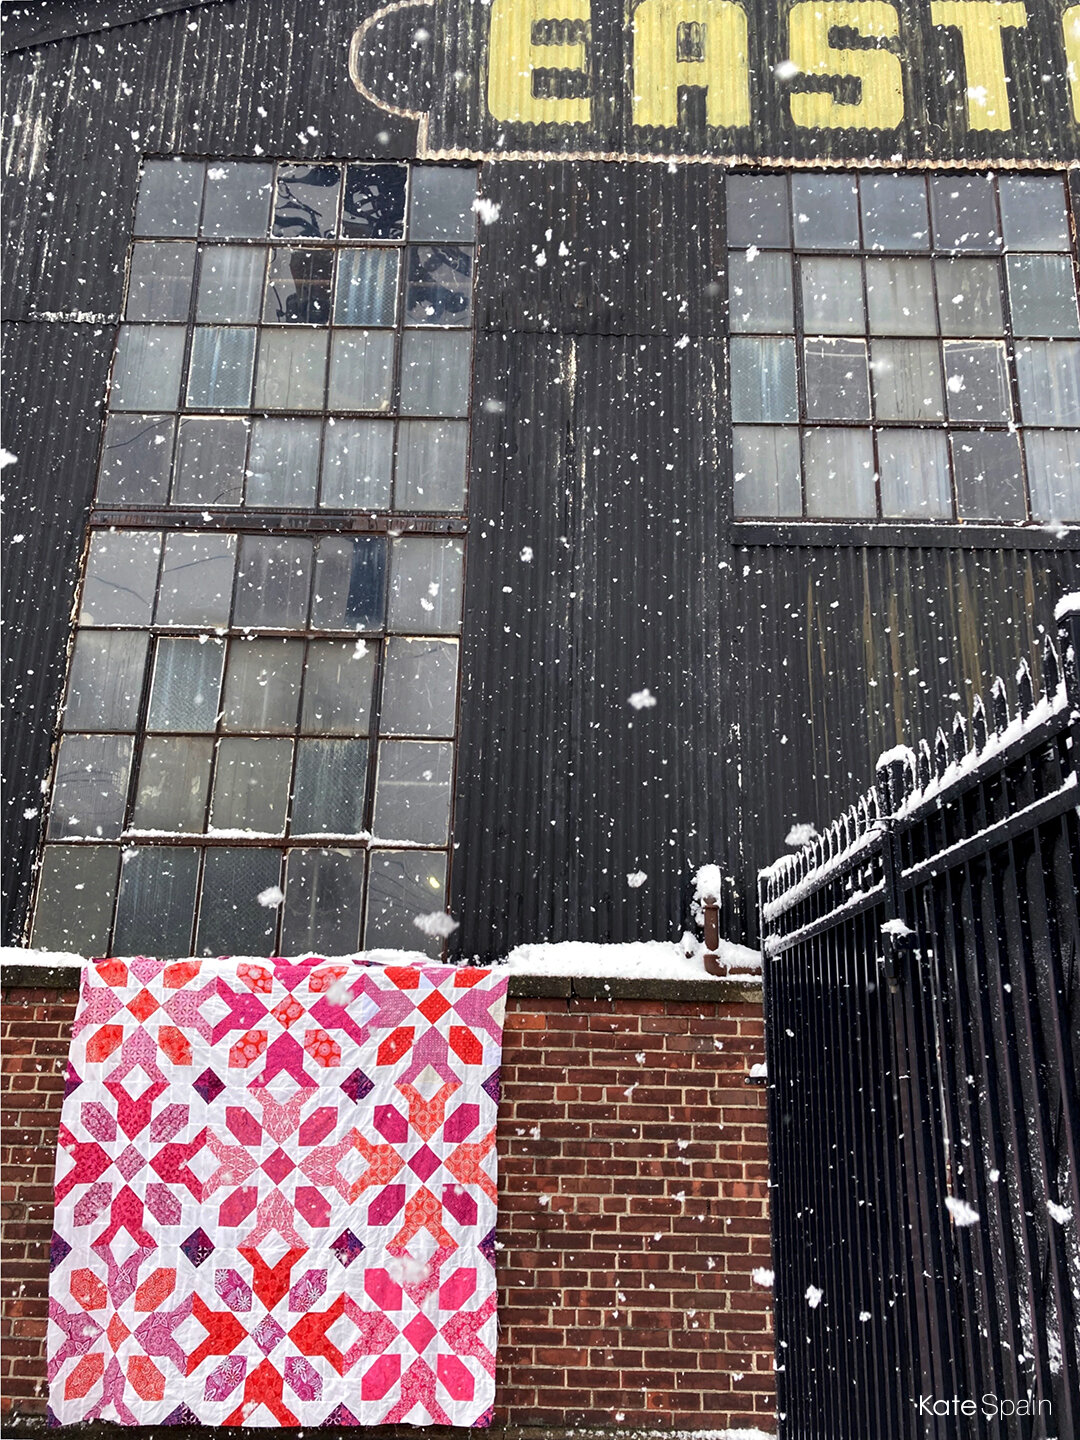 Blizzard Quilt hanging in front of brick wall